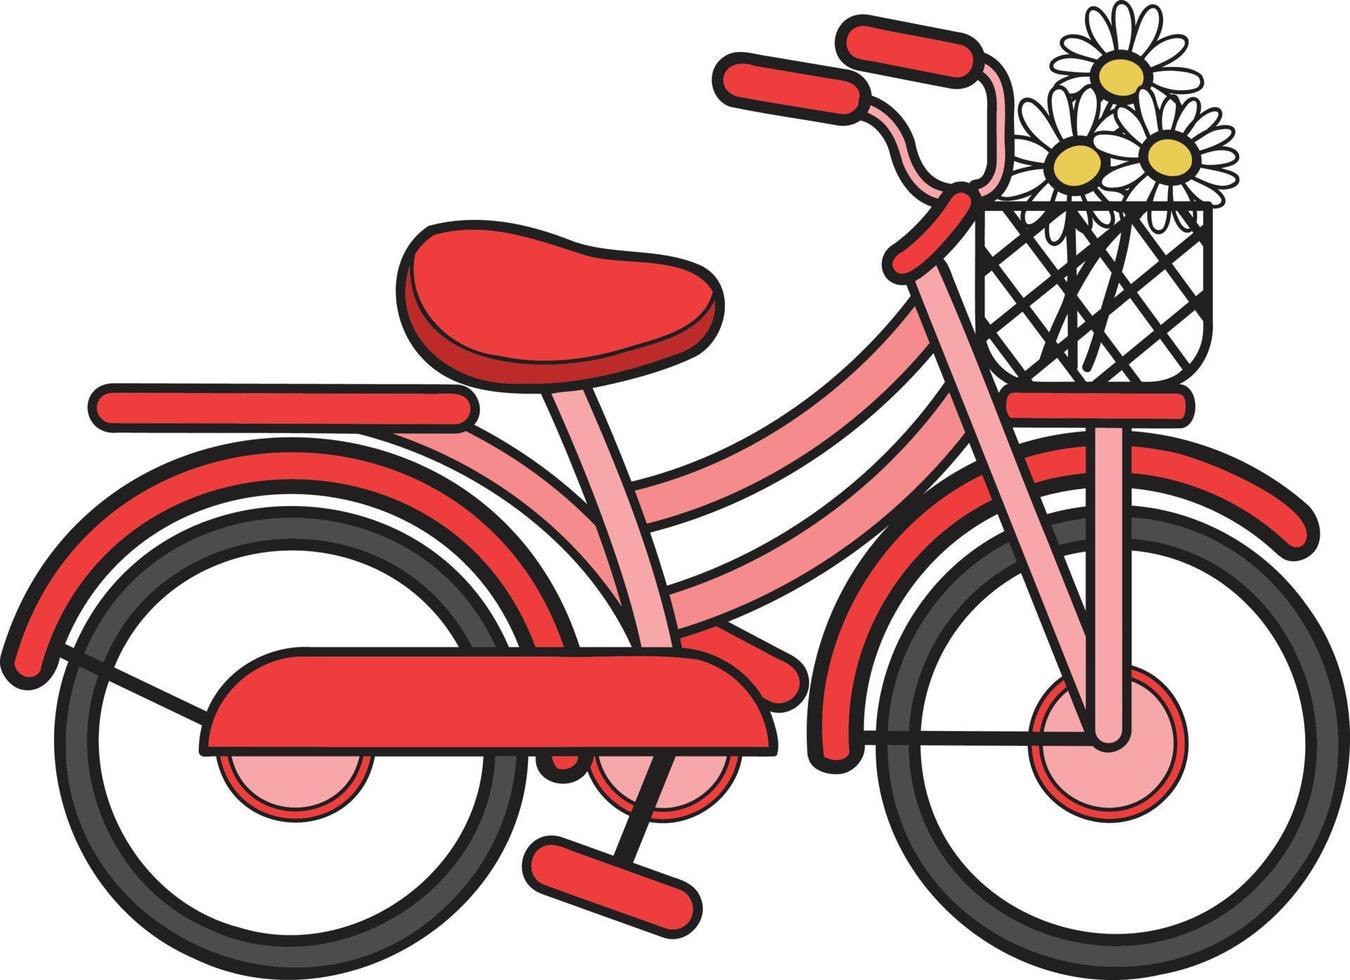 Hand Drawn bicycle with flowers illustration vector